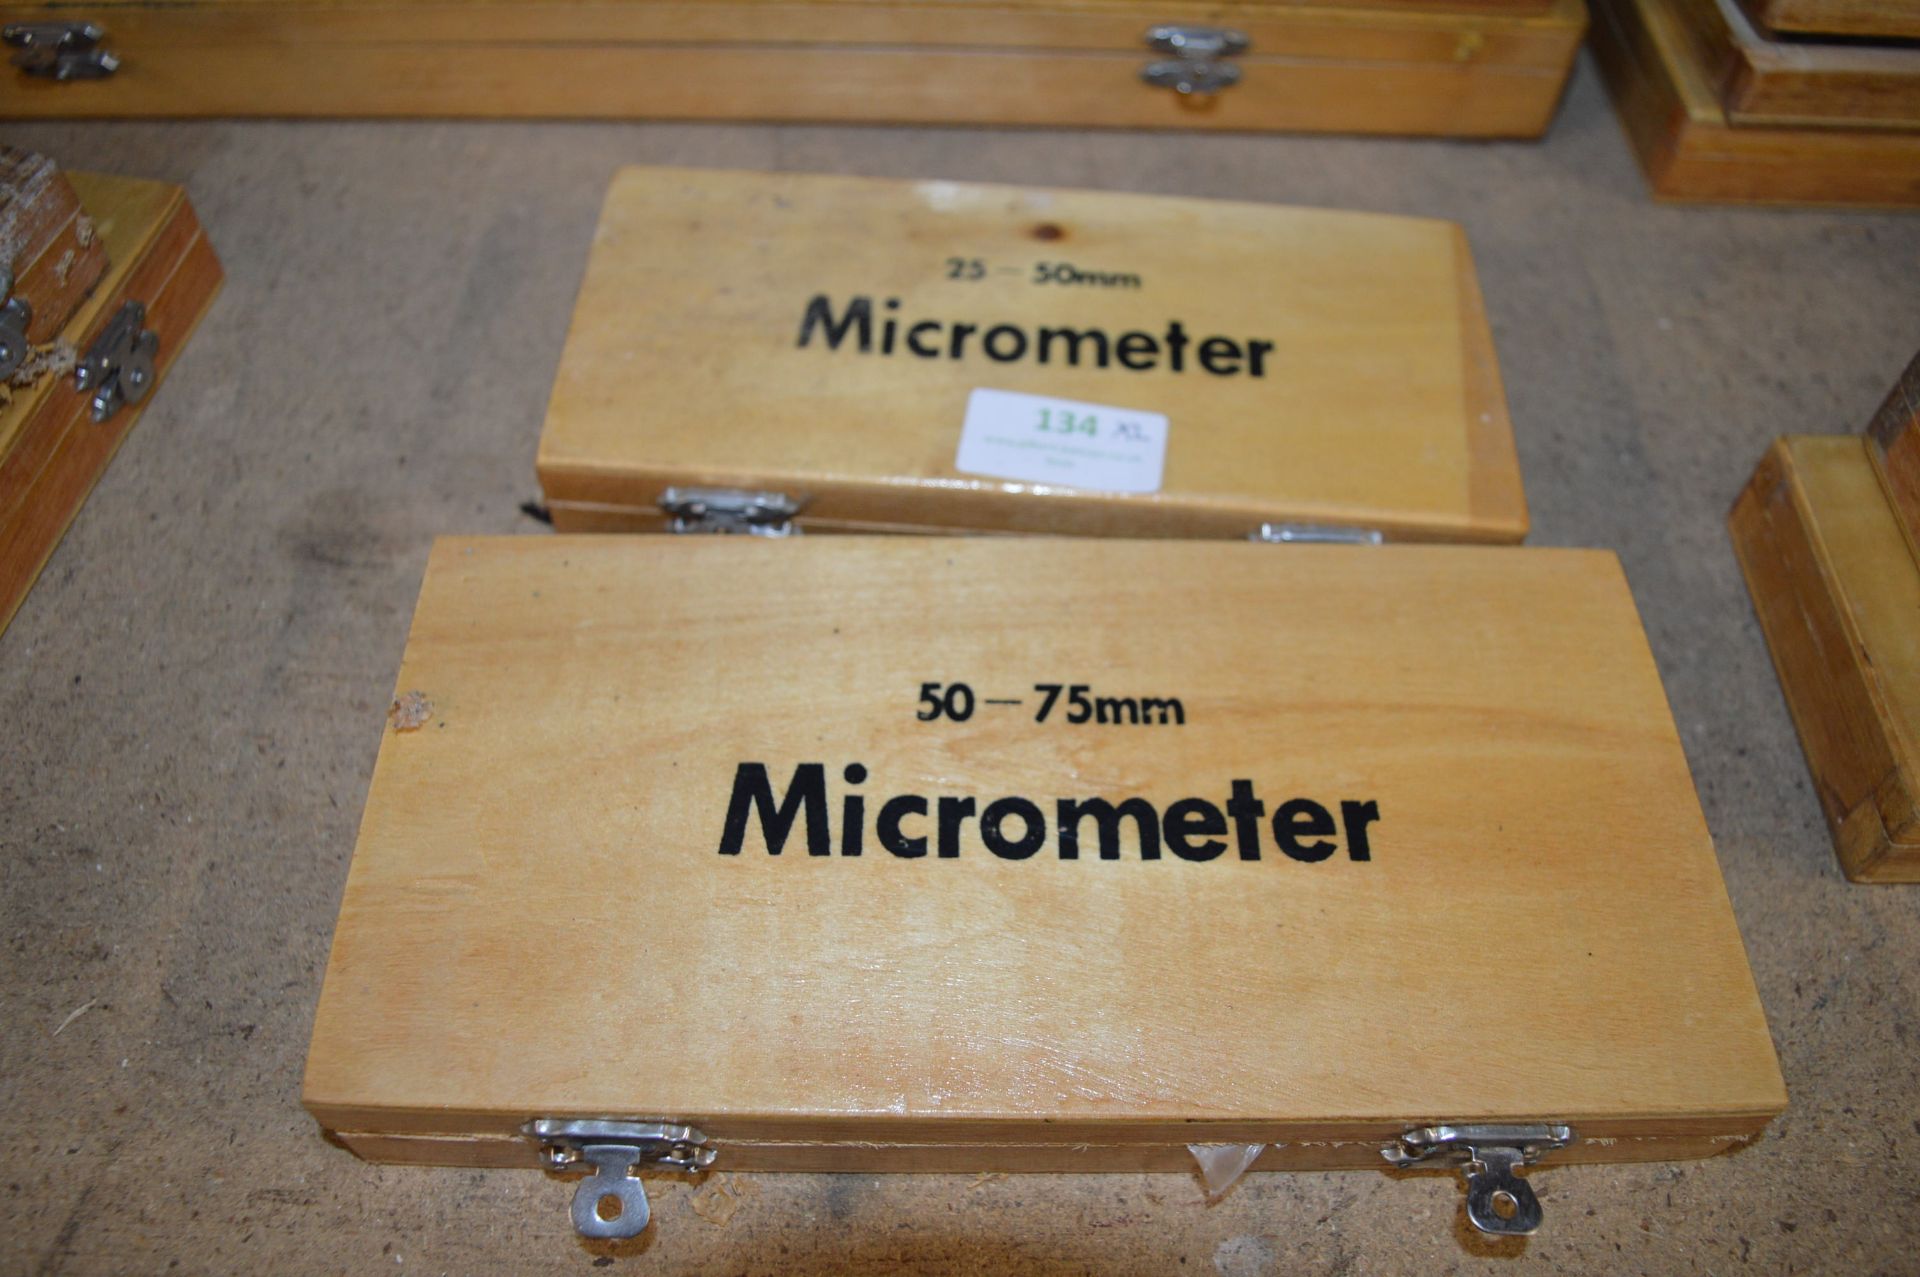 25-50mm and a 50-75mm Micrometer - Image 2 of 2